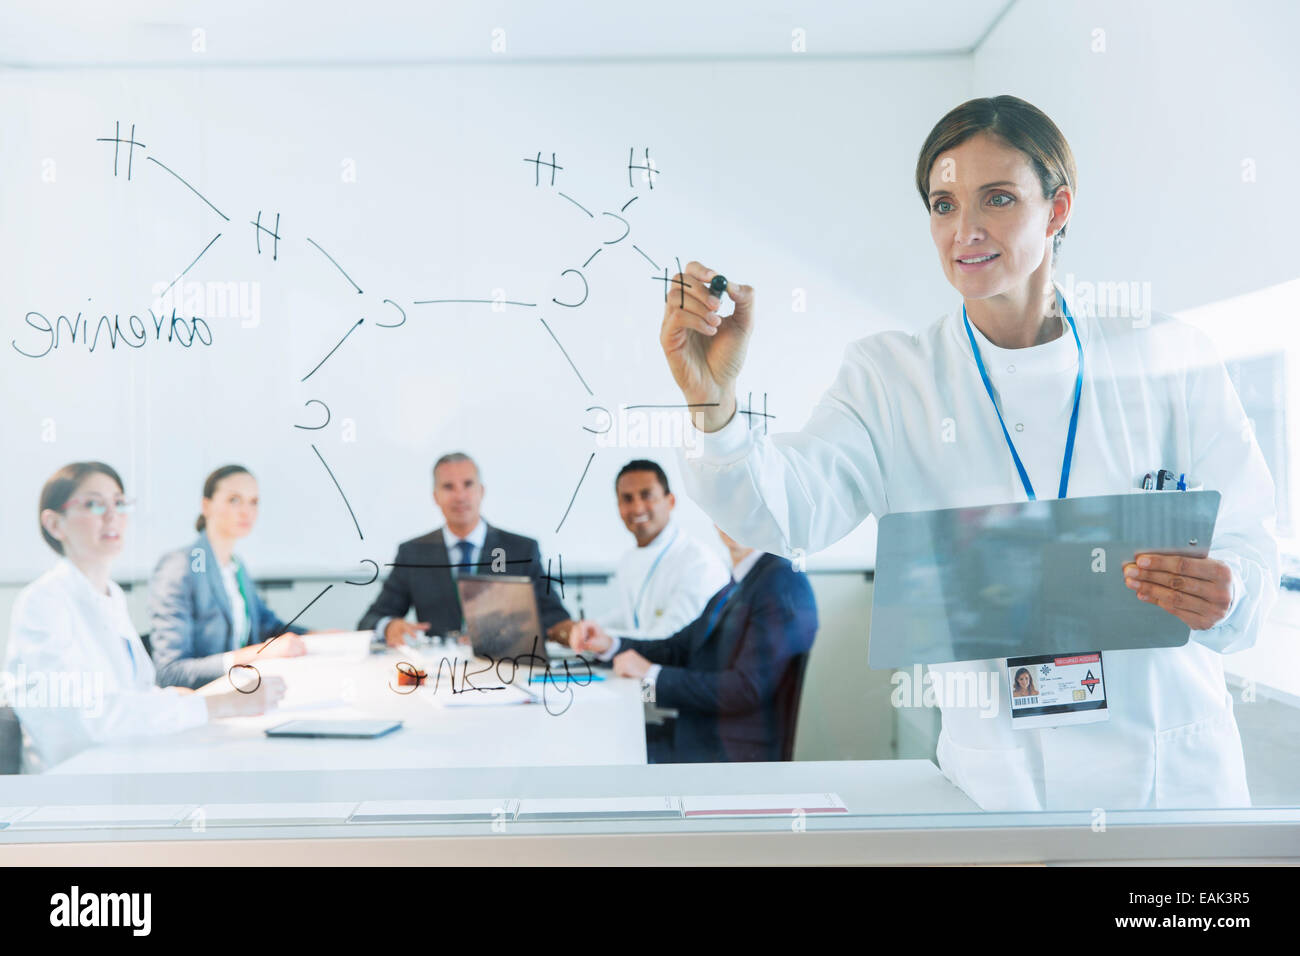 Scientist drawing chemical formula on glass for business people and colleagues Stock Photo